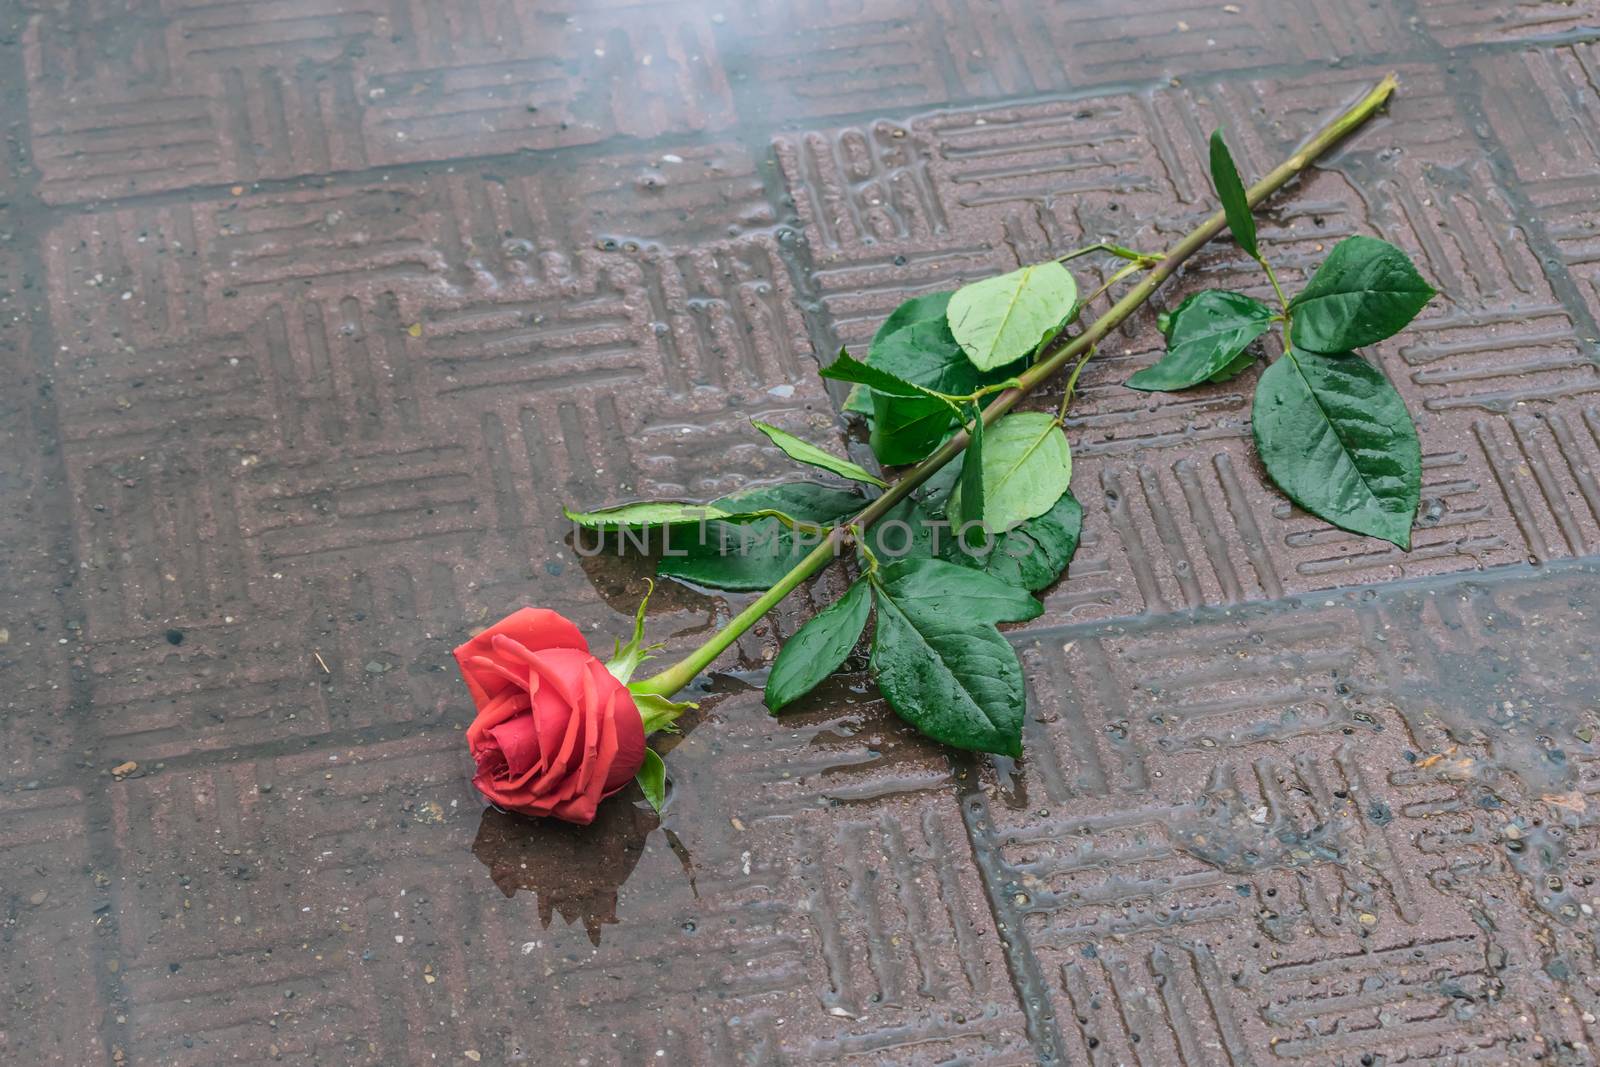 A rose thrown on the sidewalk lies in a puddle in the autumn rain